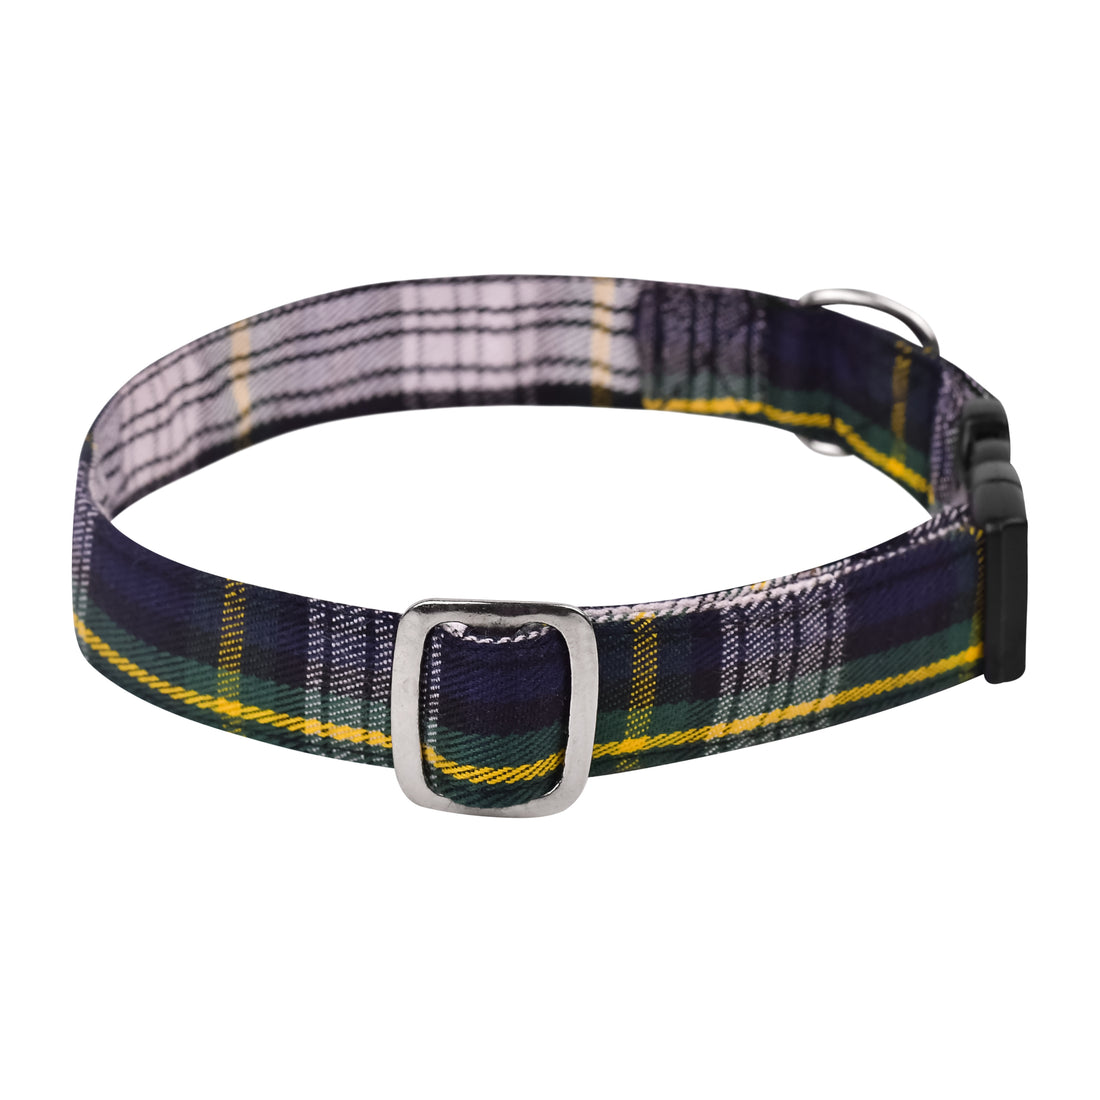 Dress Gordon Tartan Dog Collar with blue, green, and white pattern, showcasing stylish design and high-quality materials.